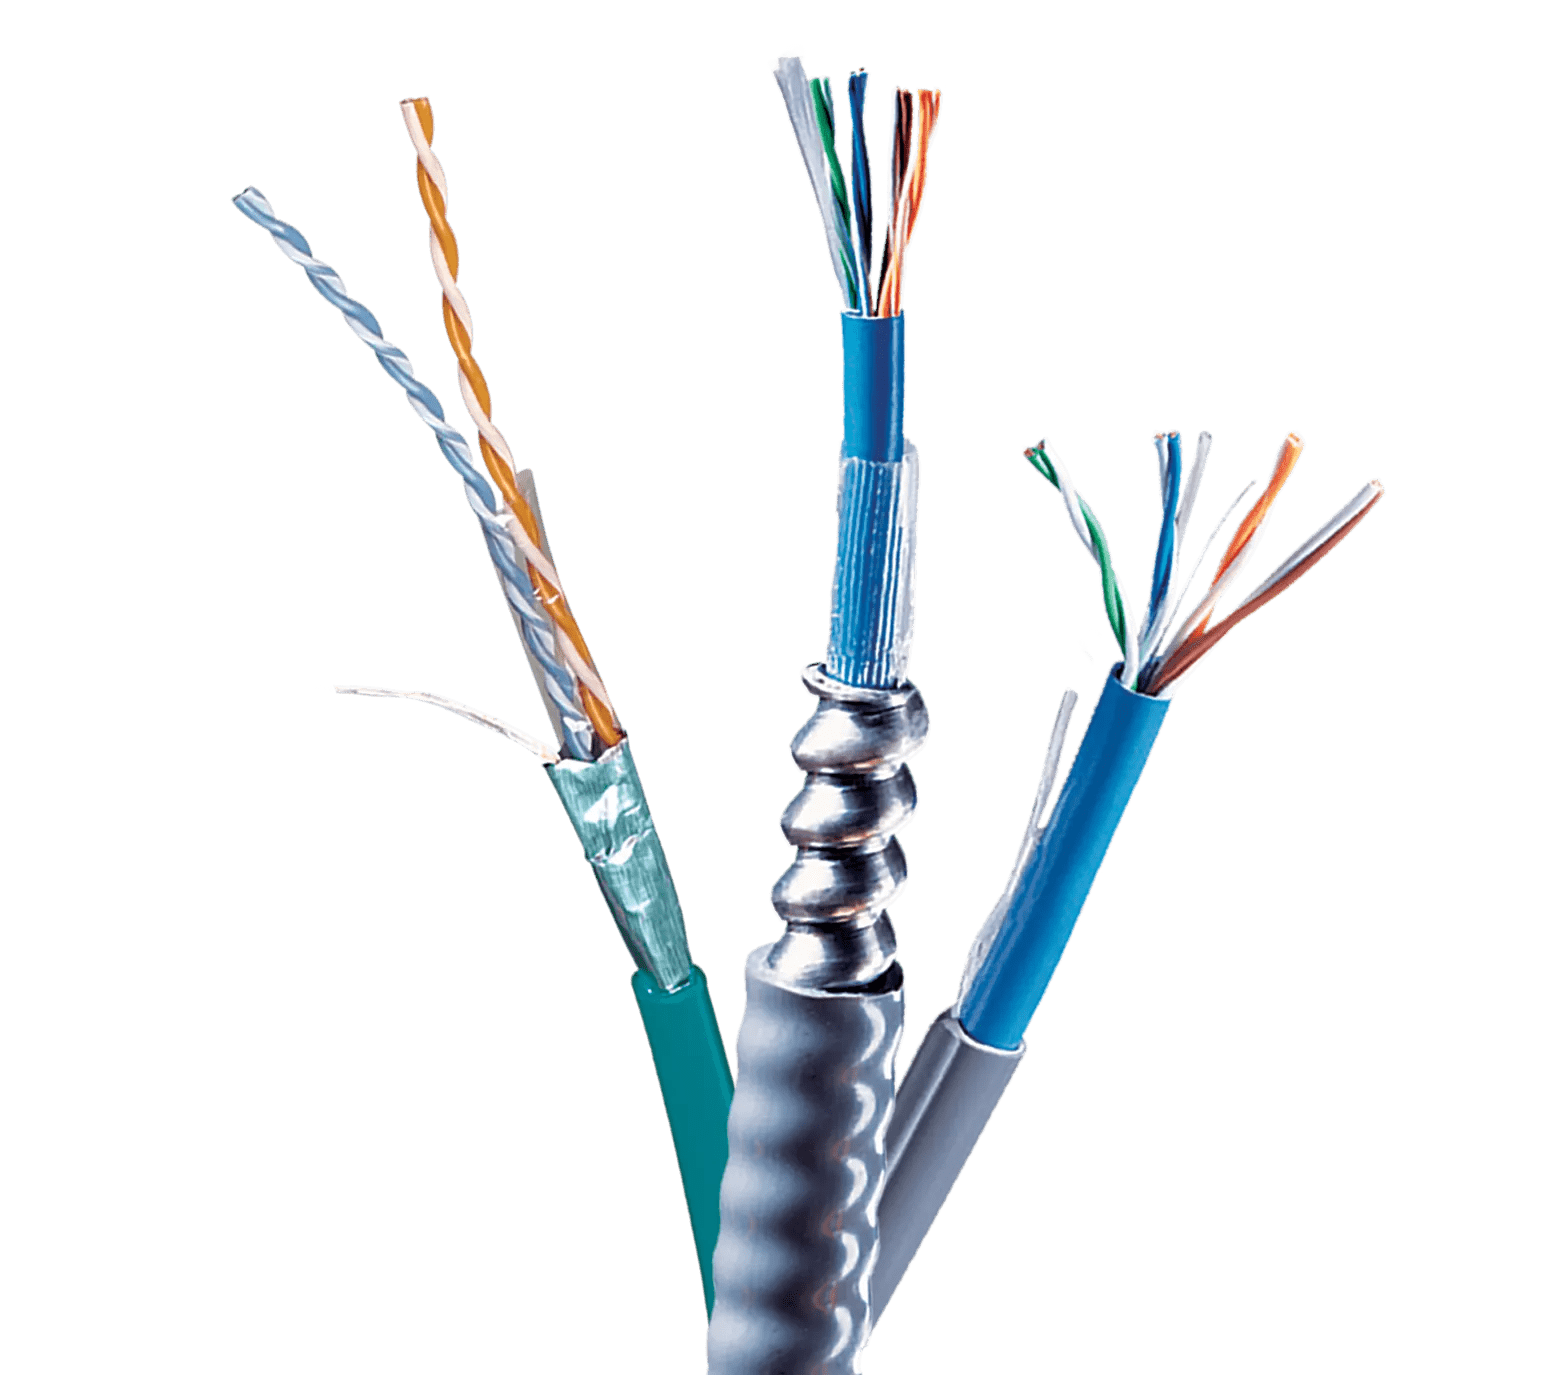 Cables - Network Cables, HDMI, Fiber Optic Cables, Outdoor Cables, Cat5,  Cat6, Ethernet Cable, Power Cords